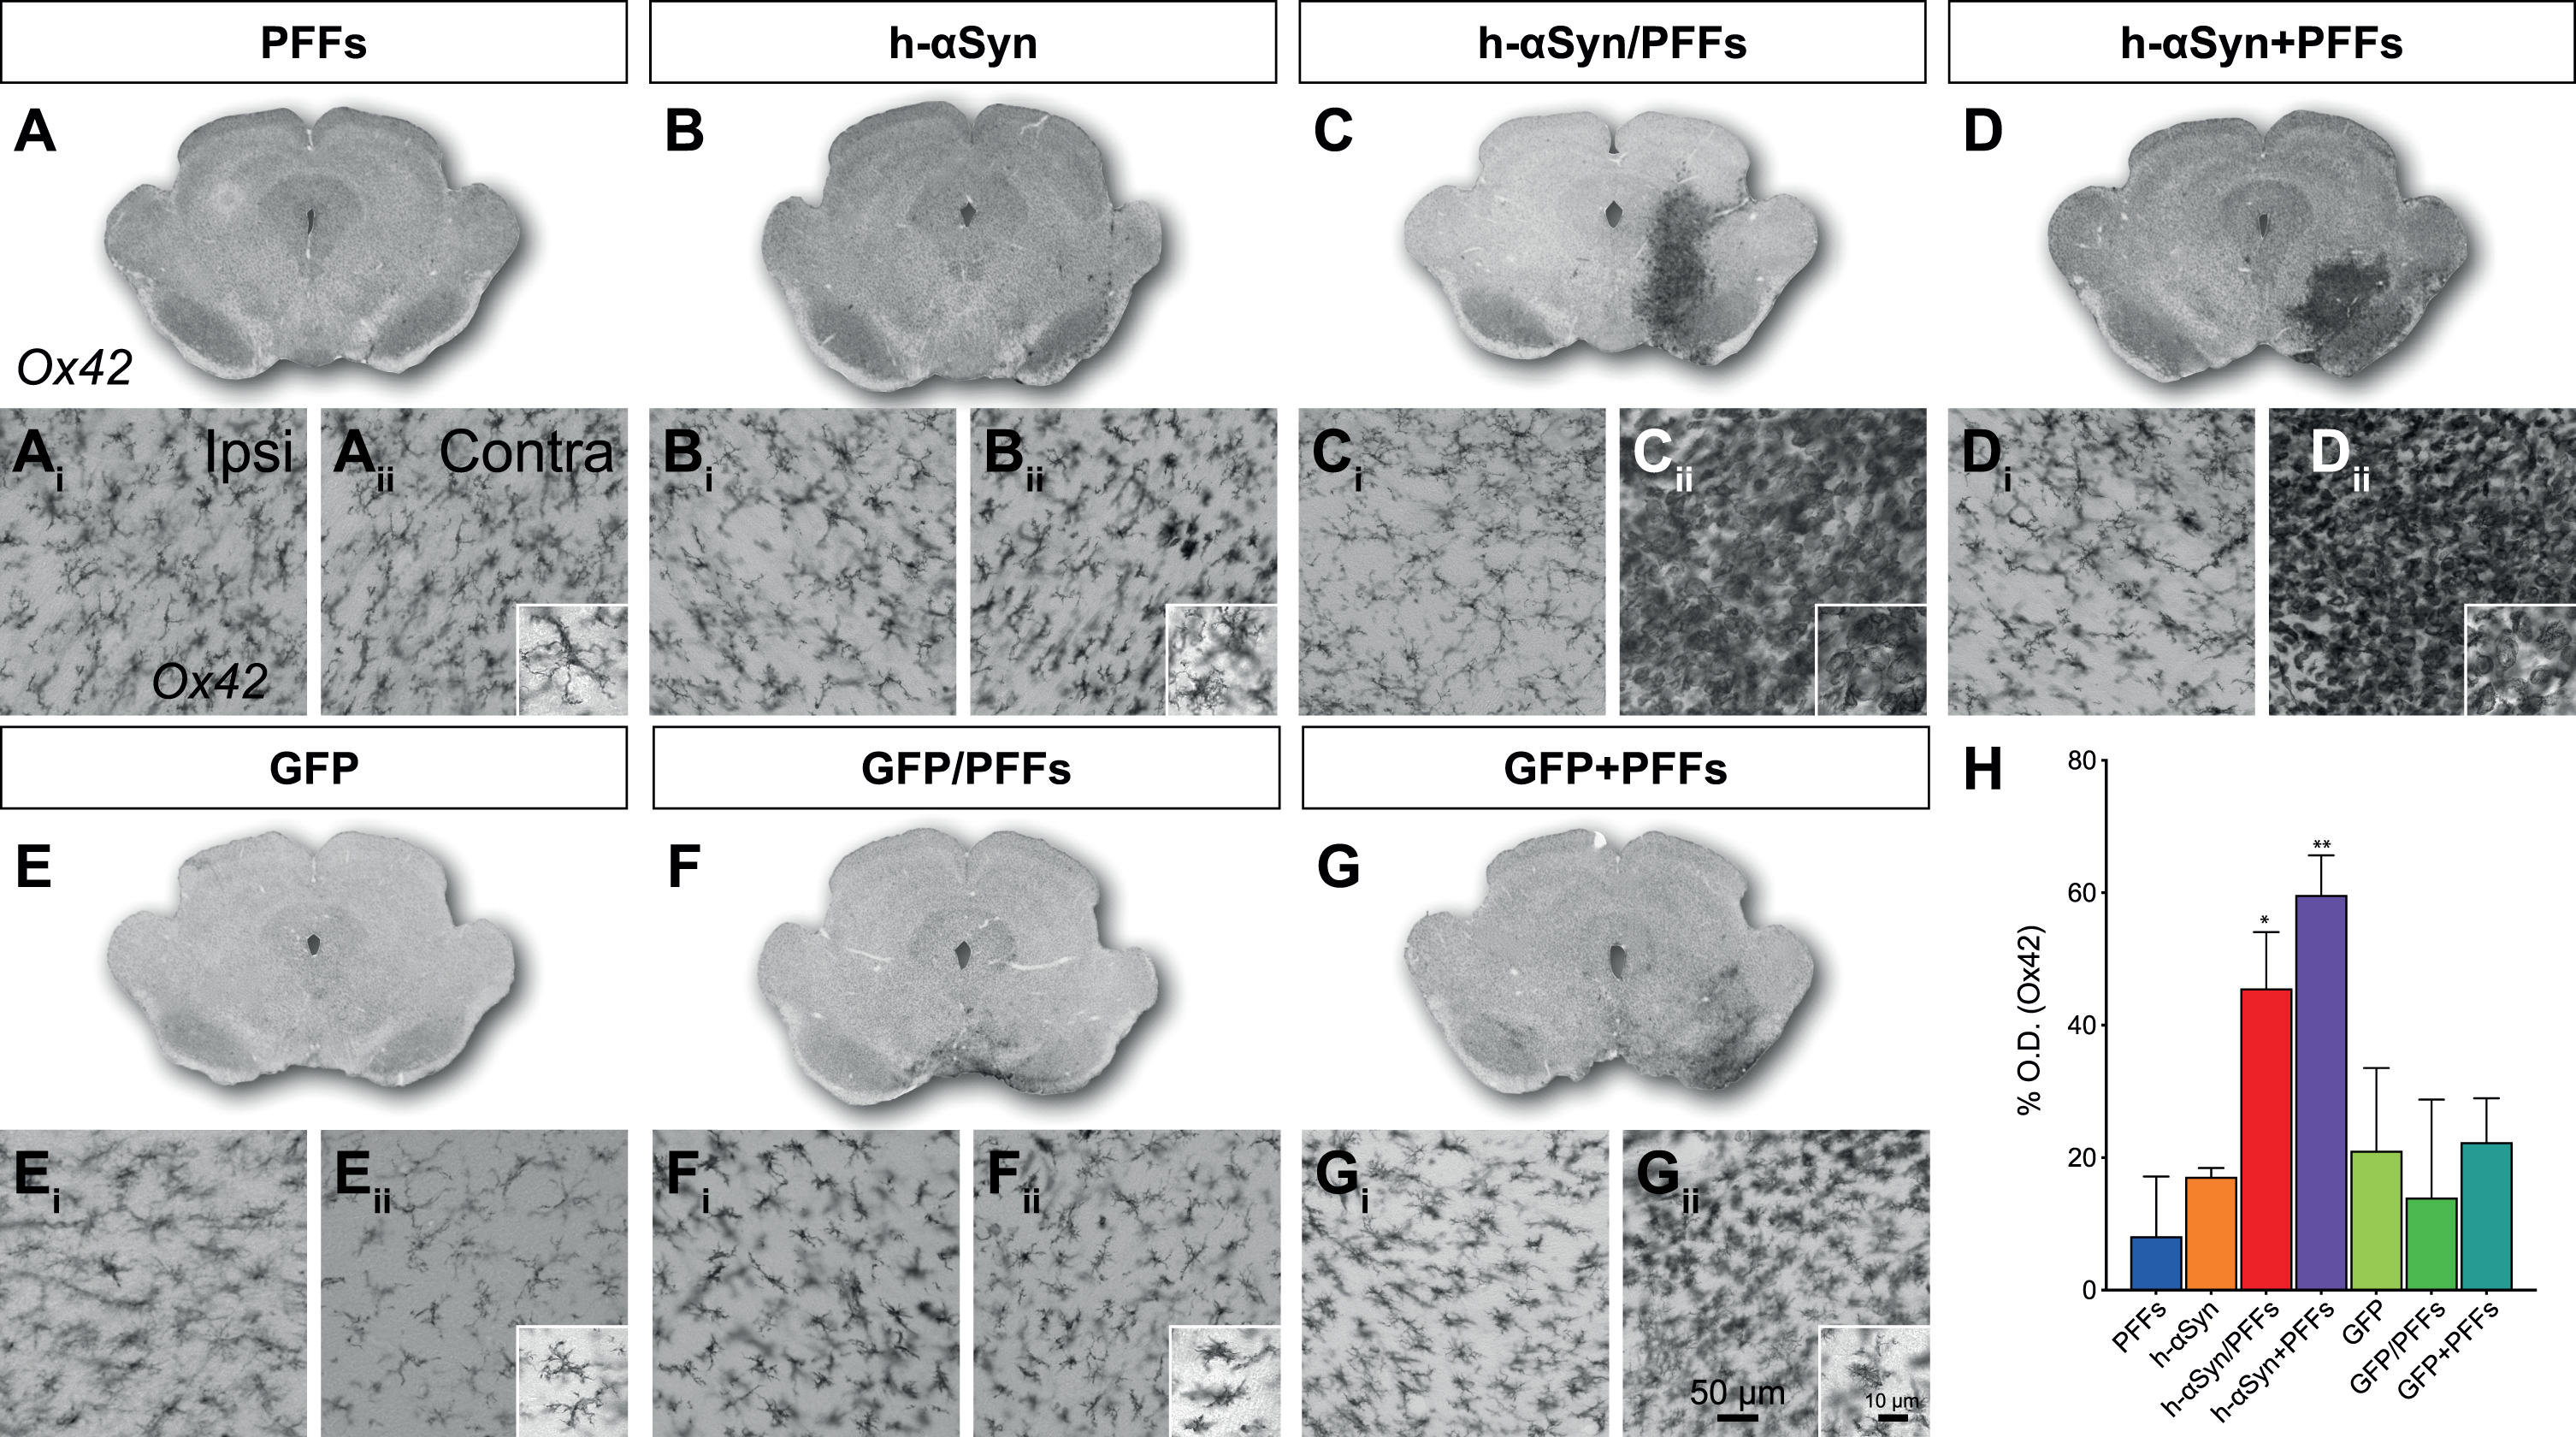 Inflammatory response. A-G) Overviews of rat midbrain sections stained for Ox42. Ai-Gii) Close-up 20X images for Ox42 immunoreactivity in contralateral (Ai-Gi) and ipsilateral (Aii-Gii) side for target and control groups and additional 63X magnification images (Aii-Gii) for the ipsilateral side. H) Densitometric analysis showing the increase in percentage for Ox42 staining intensity in the ipsilateral midbrain (vs. contralateral) for target and control groups. PFFs, preformed fibrils; h-αSyn, human alpha-synuclein; GFP, green fluorescent protein; Ipsi, ipsilateral; Contra, contralateral. Data are expressed as mean ± SEM. (*p < 0.05, **p < 0.01).